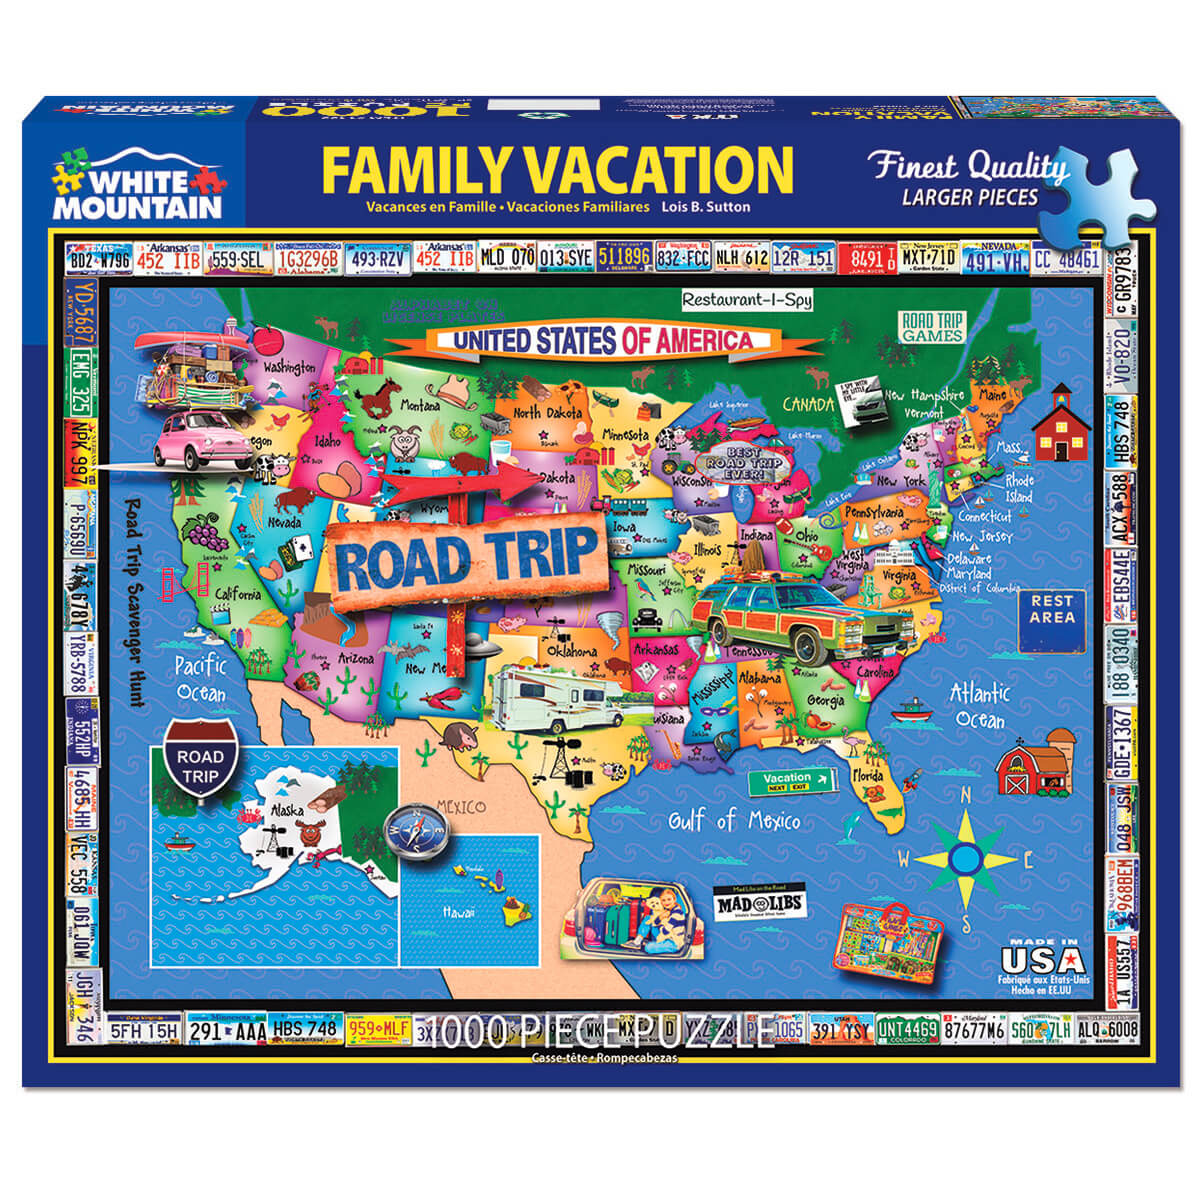 White Mountain Puzzles Family Vacation 1000 Piece Jigsaw Puzzle